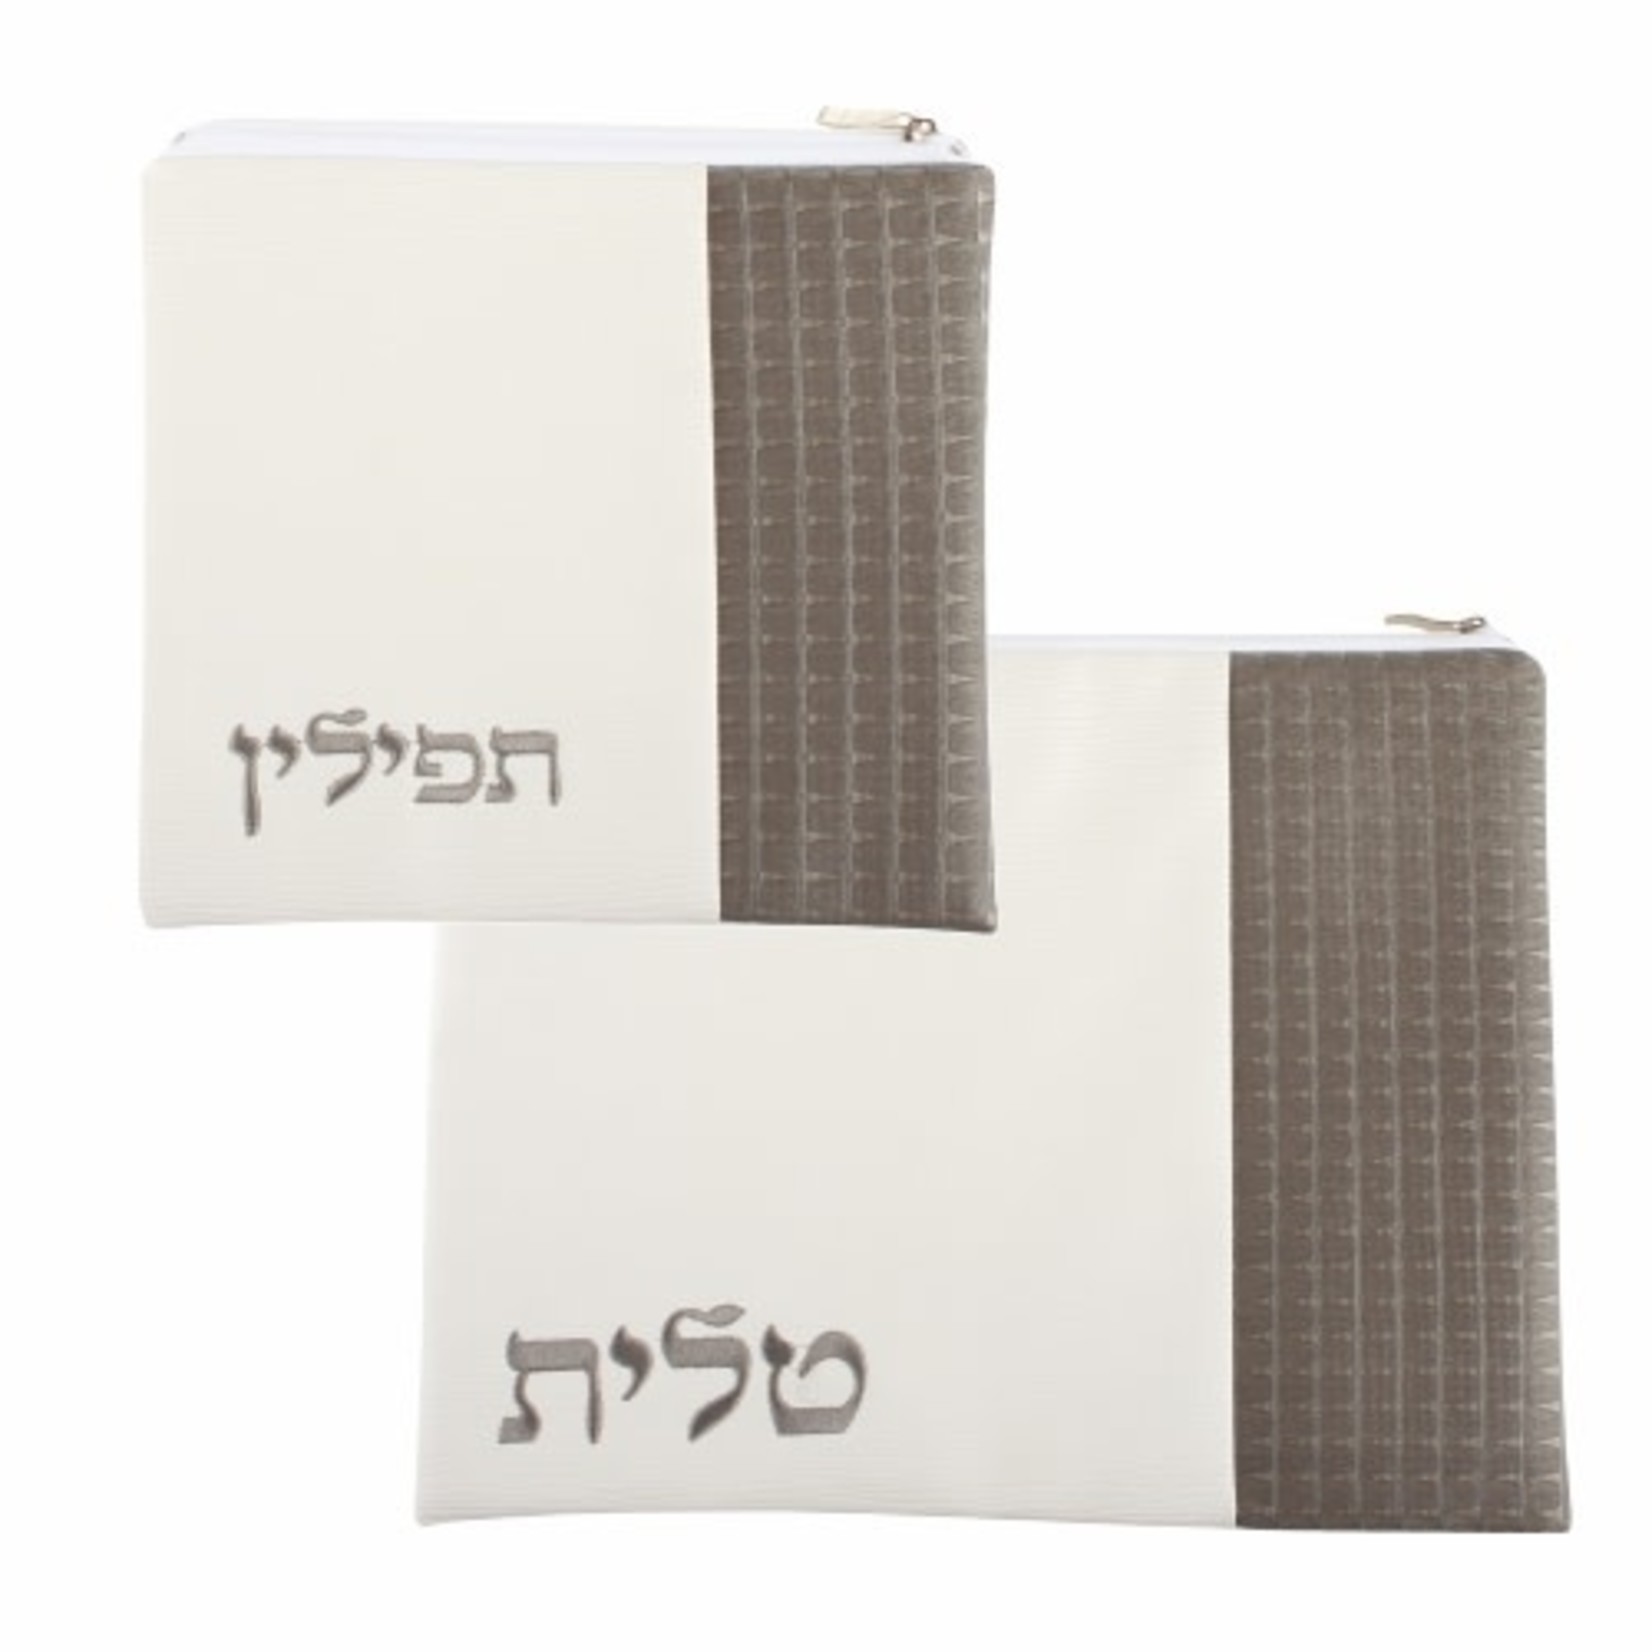 Leatherette Tallit and Tefillin Bag Set, White and Grey